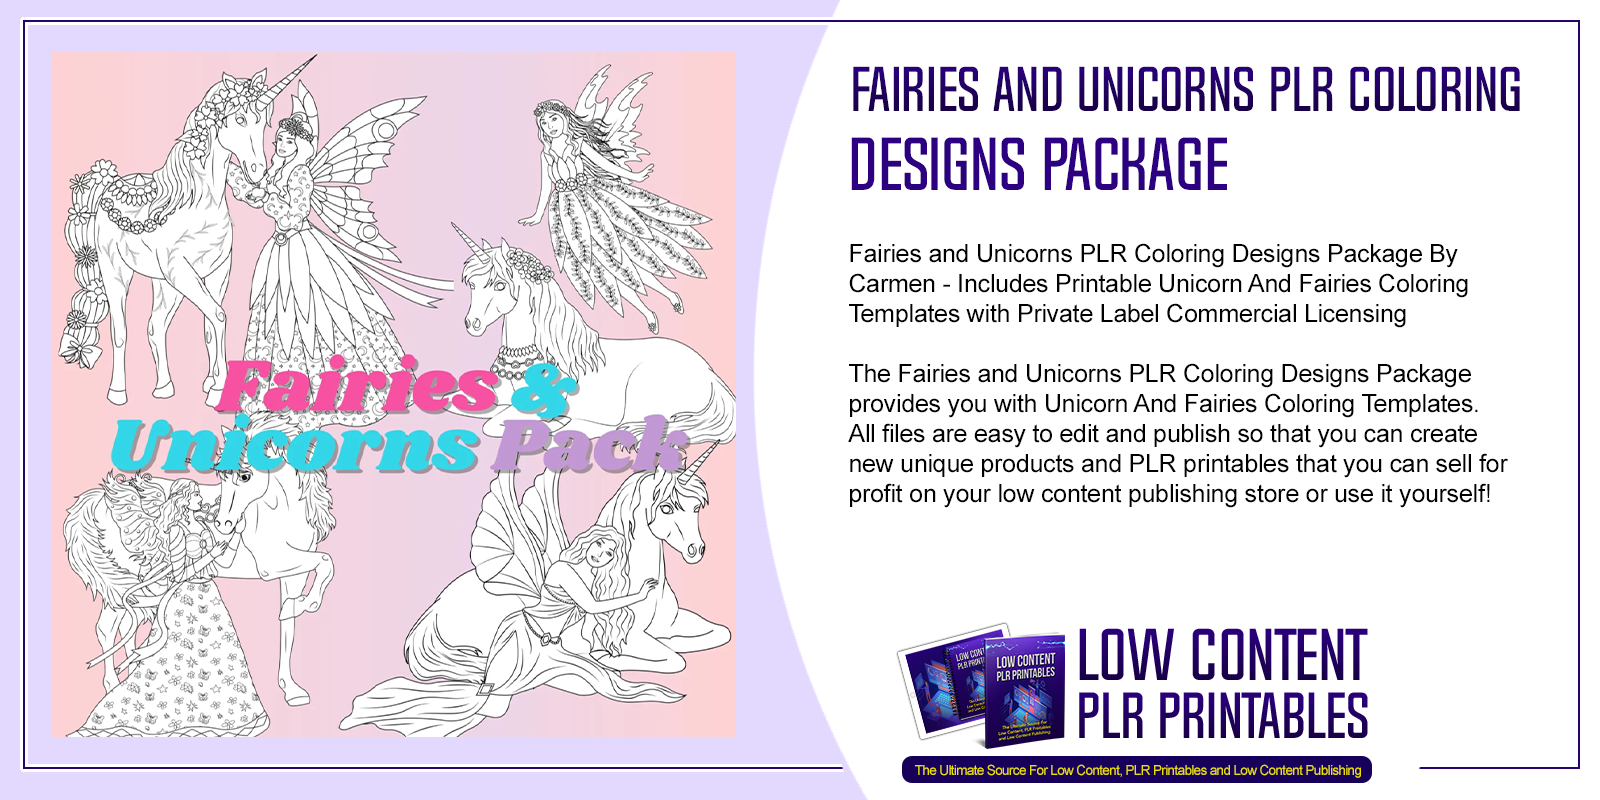 Fairies and Unicorns PLR Coloring Designs Package